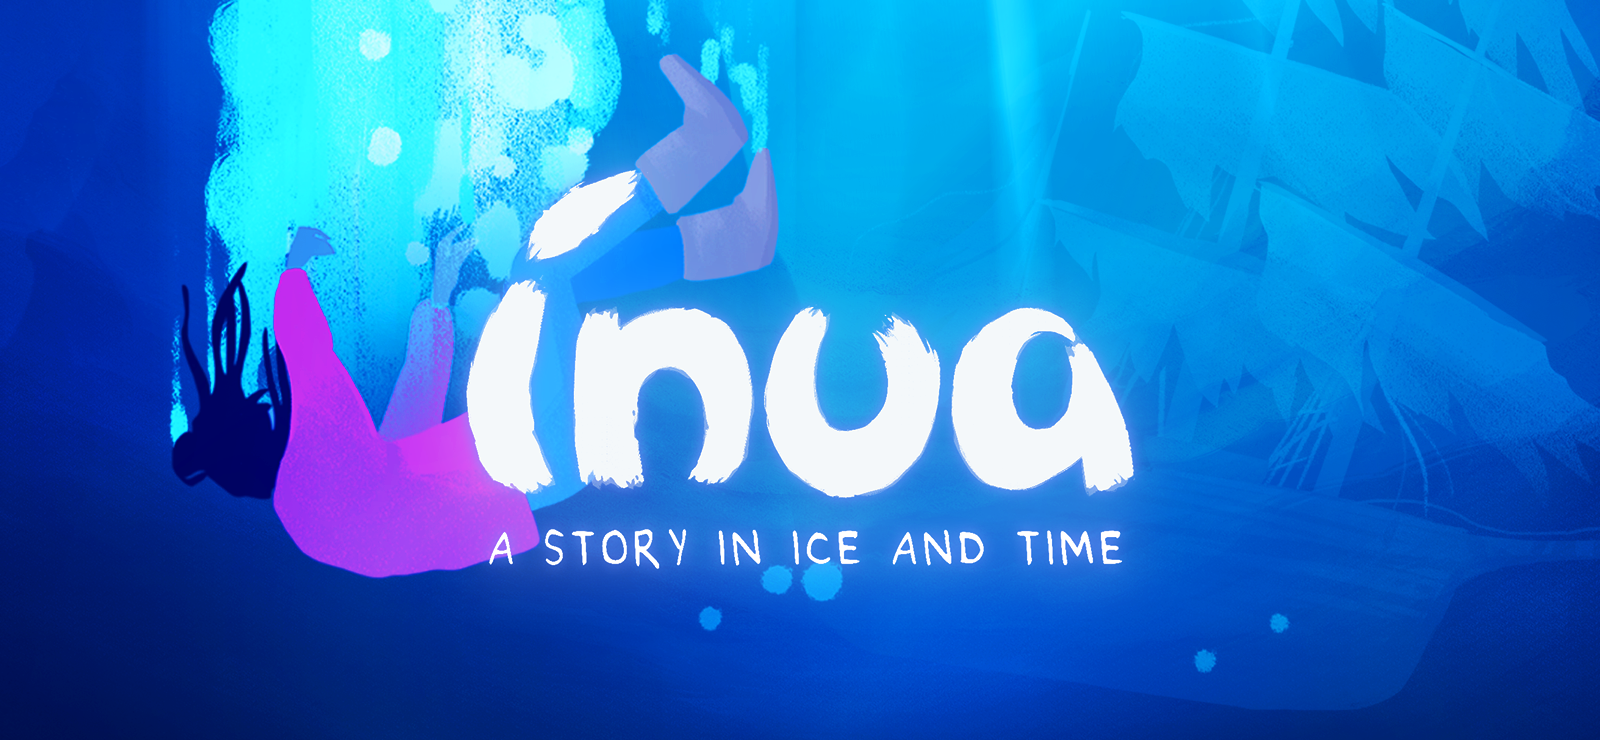 Inua - A Story In Ice And Time